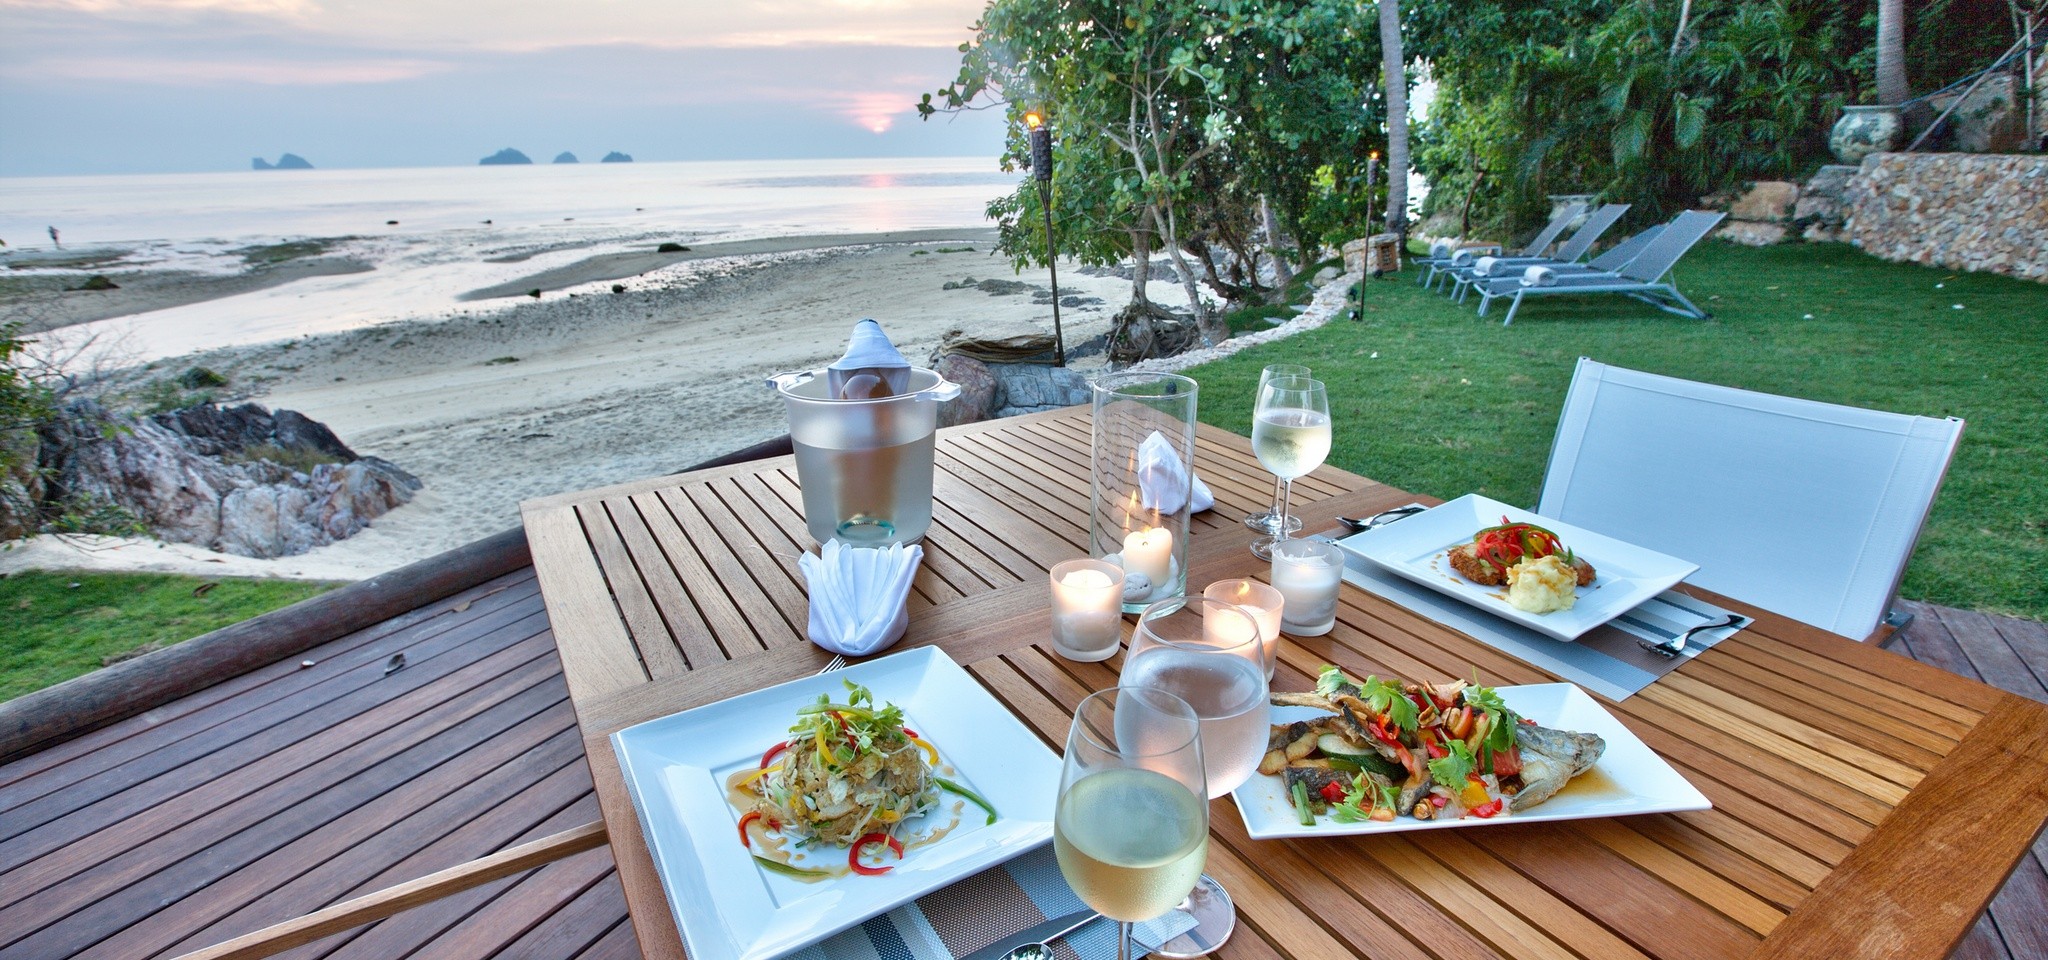 TheView Meal View – The View Samui – Samui – Thailand